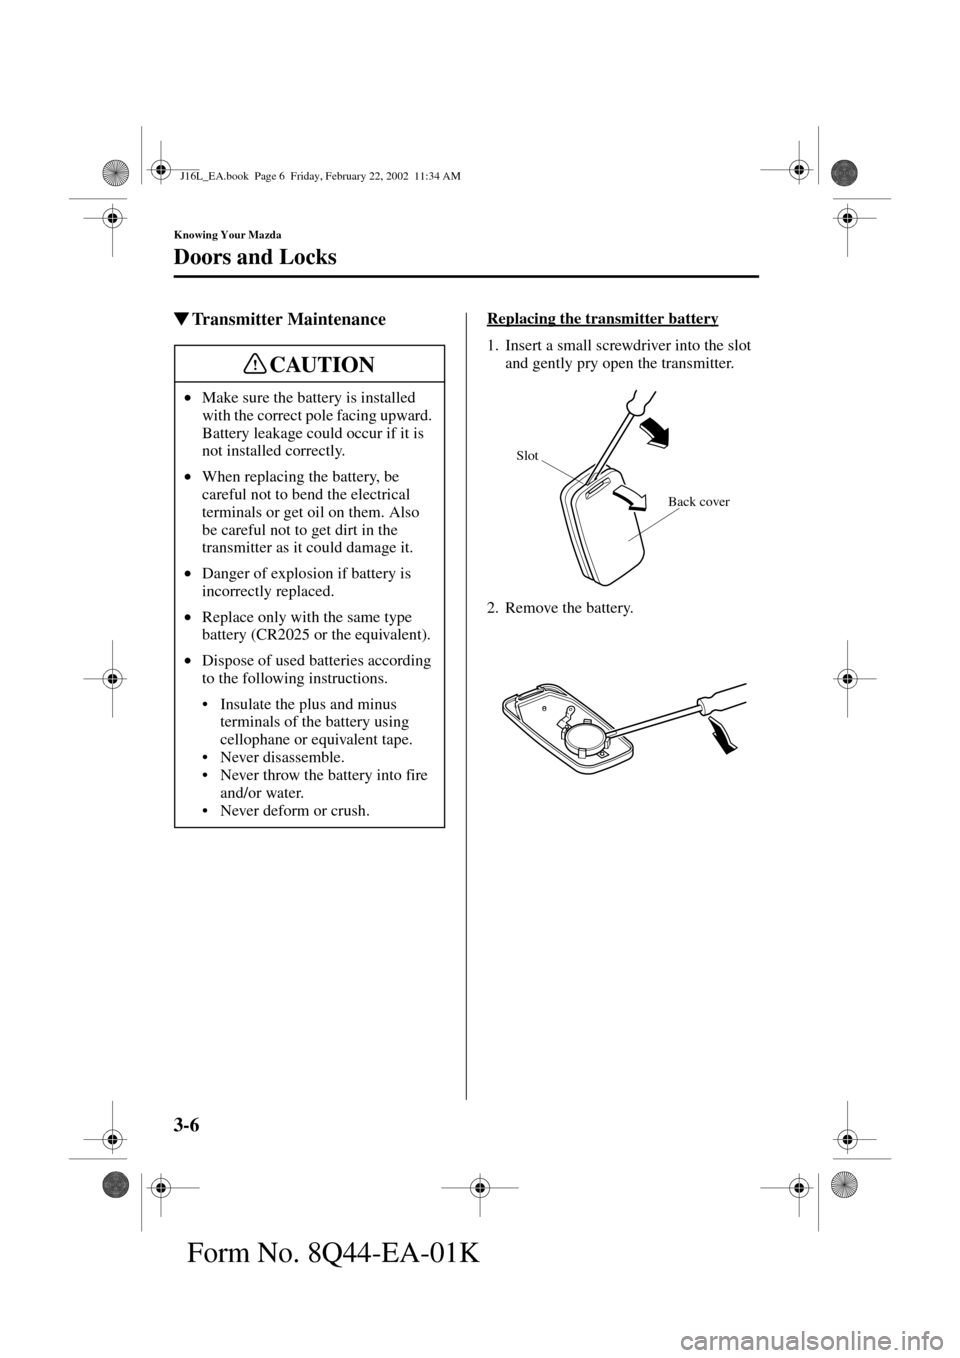 MAZDA MODEL MPV 2002  Owners Manual (in English) 3-6
Knowing Your Mazda
Doors and Locks
Form No. 8Q44-EA-01K
Transmitter MaintenanceReplacing the transmitter battery
1. Insert a small screwdriver into the slot 
and gently pry open the transmitter.
